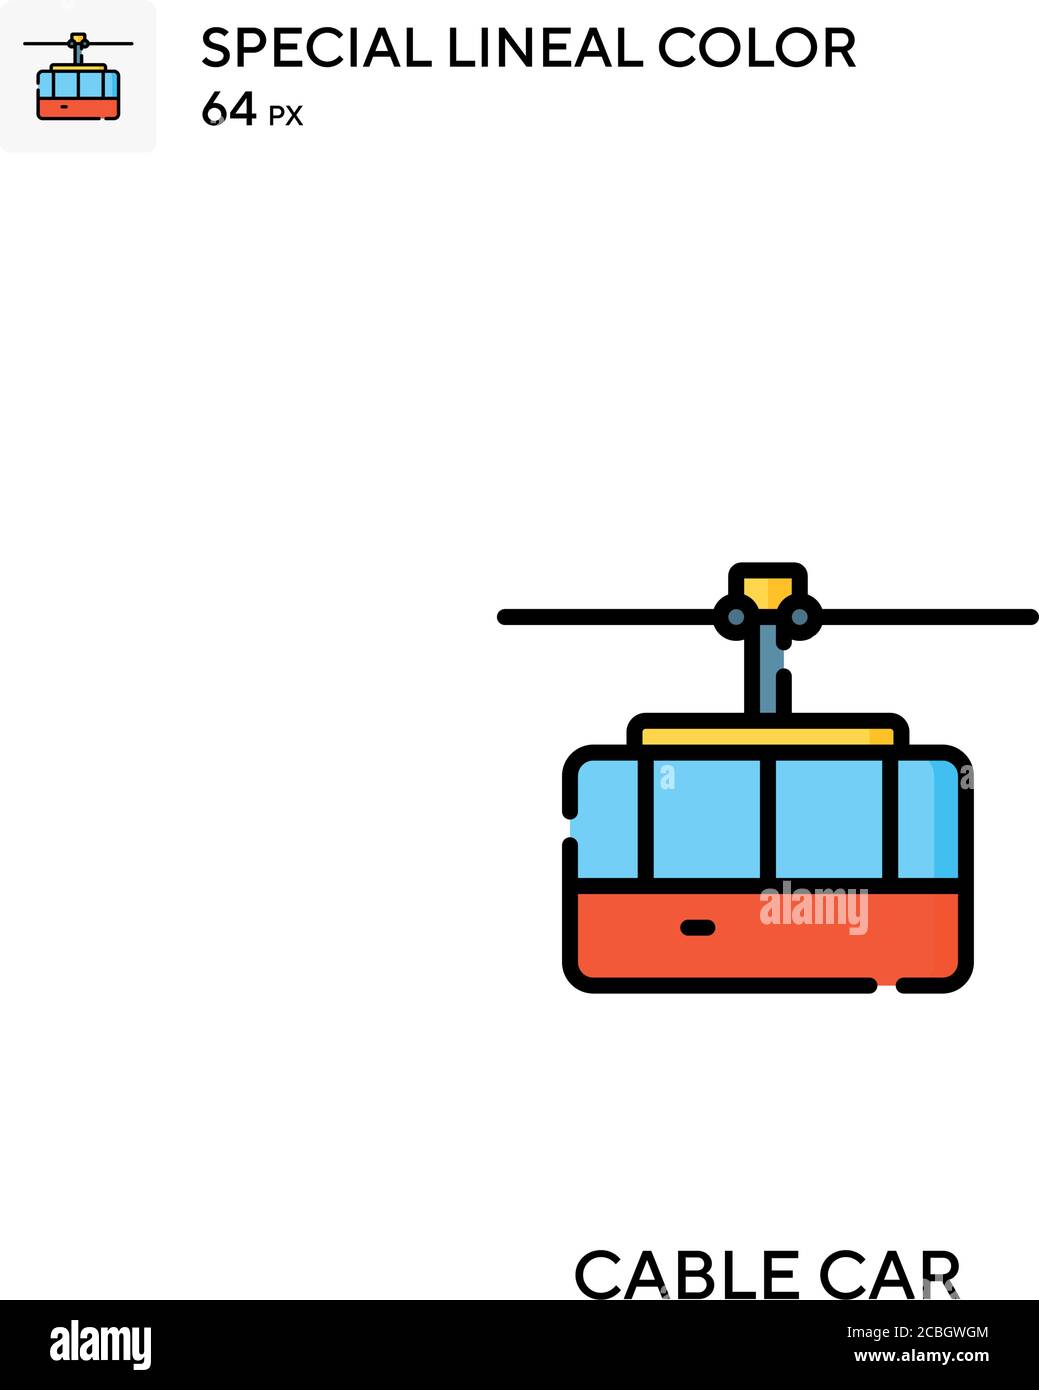 Cable car special lineal color vector icon. Cable car icons for your business project Stock Vector